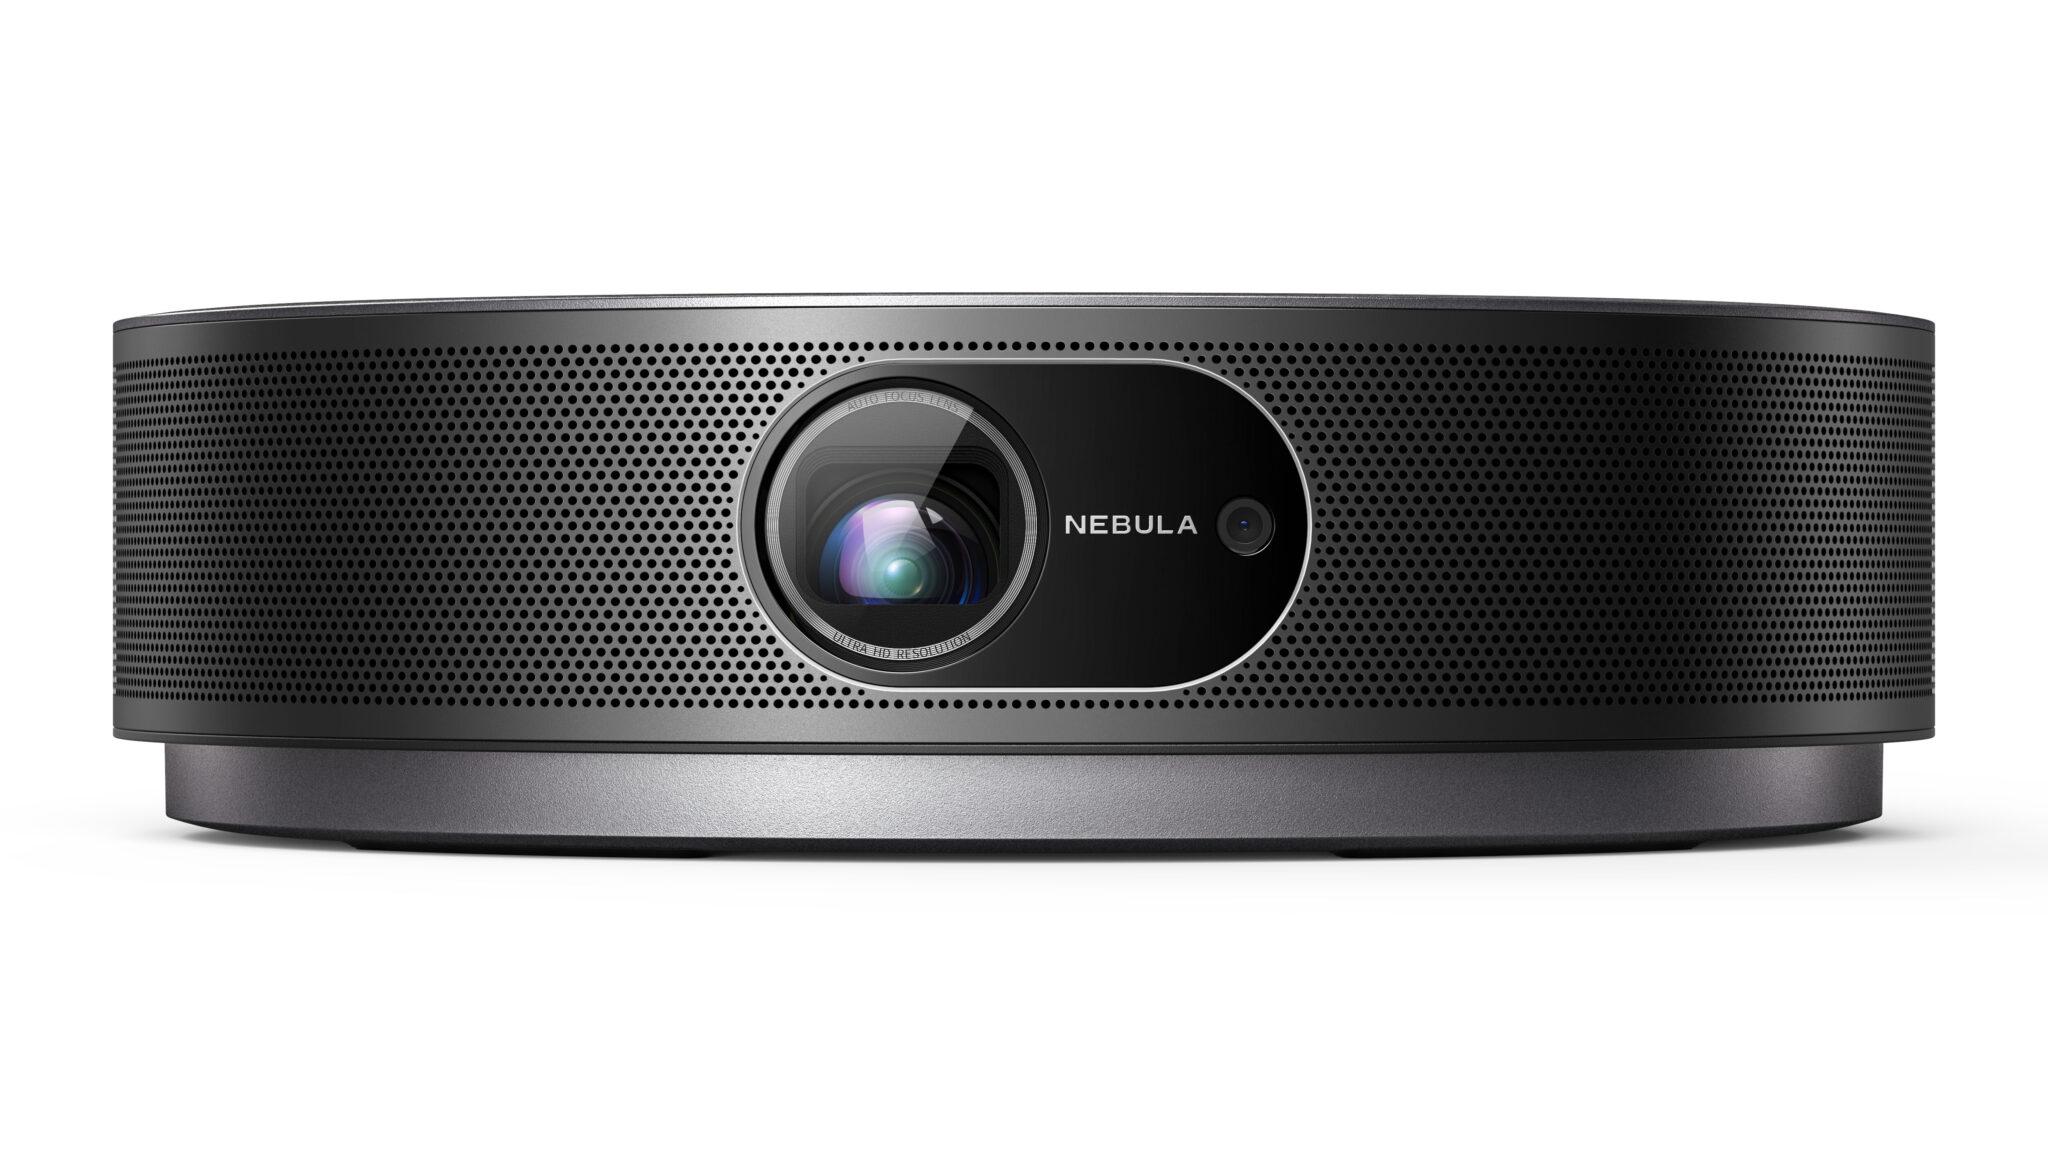 Anker Nebula Cosmos Max 4K Projector Review - Is it the Ideal Portable